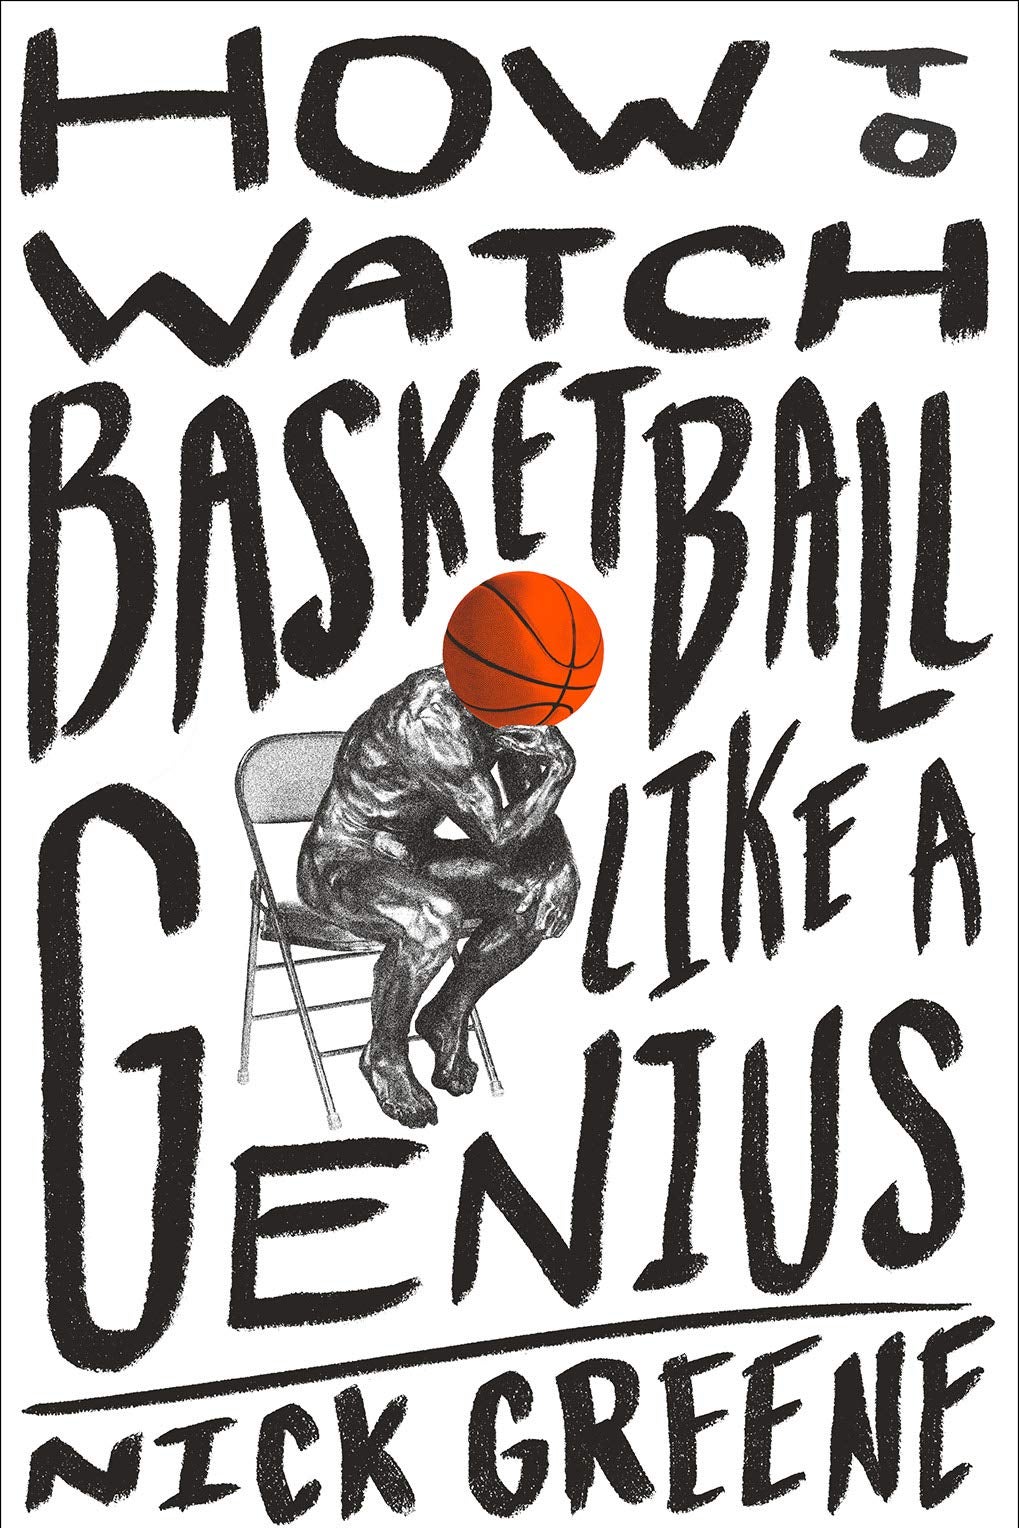 How to Watch Basketball Like a Genius by Nick Greene Book Jacket, showing "The Thinker" with a basketball as its head.